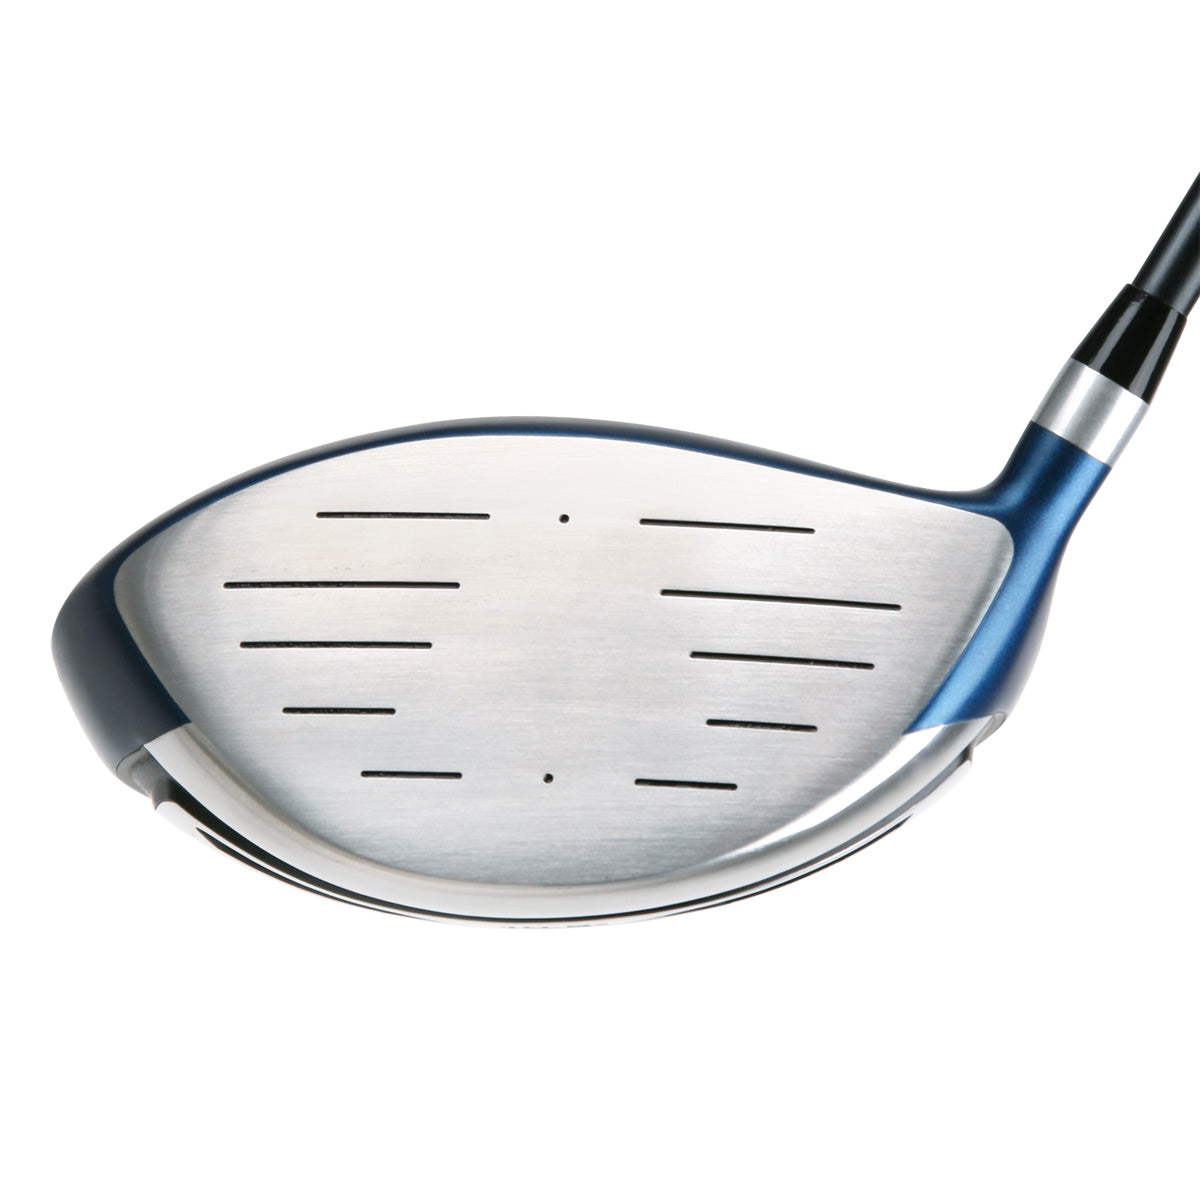 face view of the Intech Behemoth Non-Conforming 520cc Golf Driver